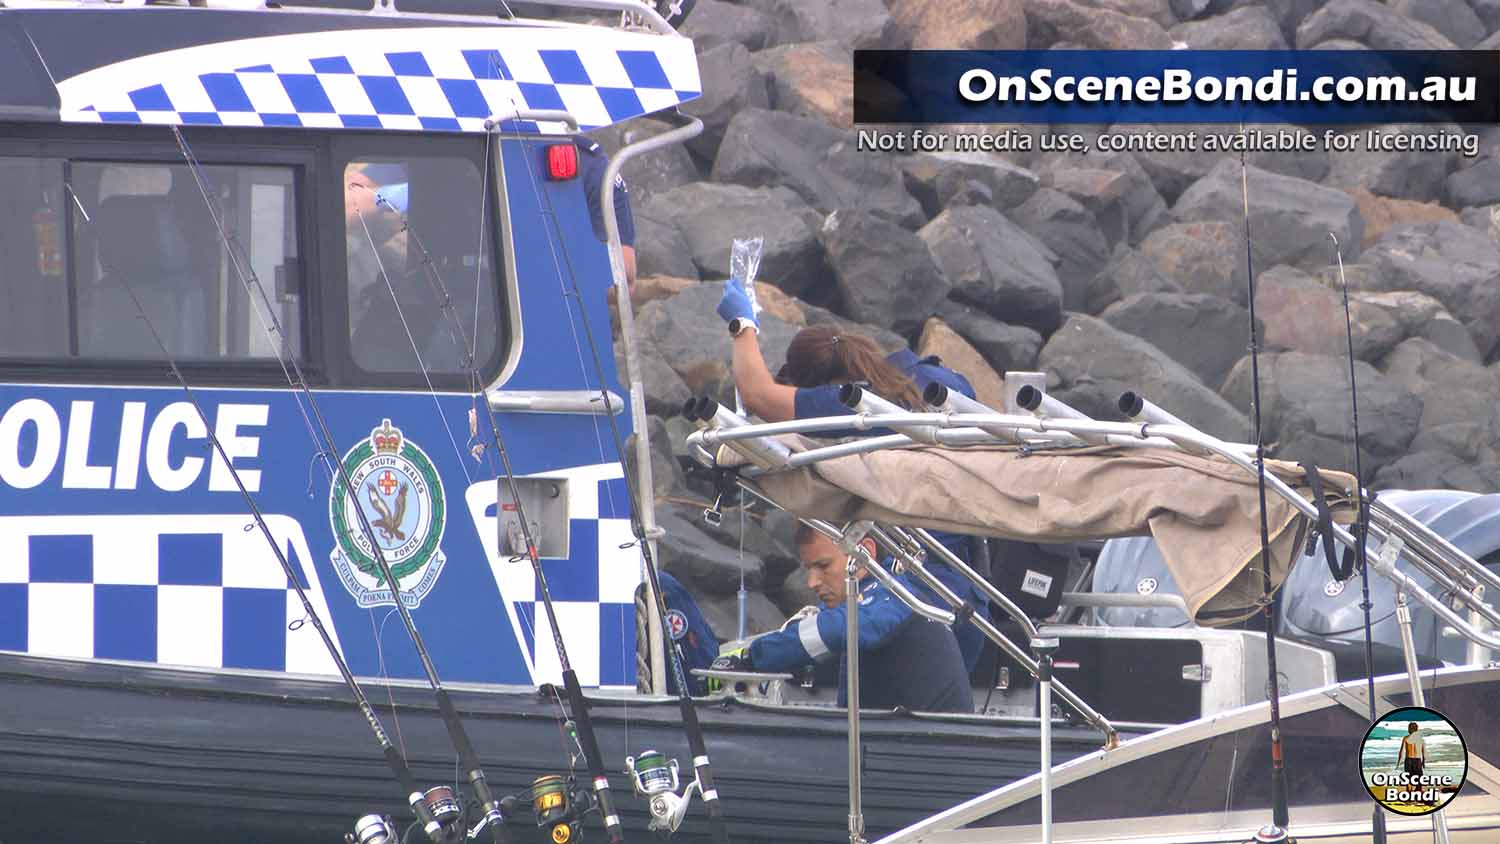 Man dies after whale incident in Sydney, Australia